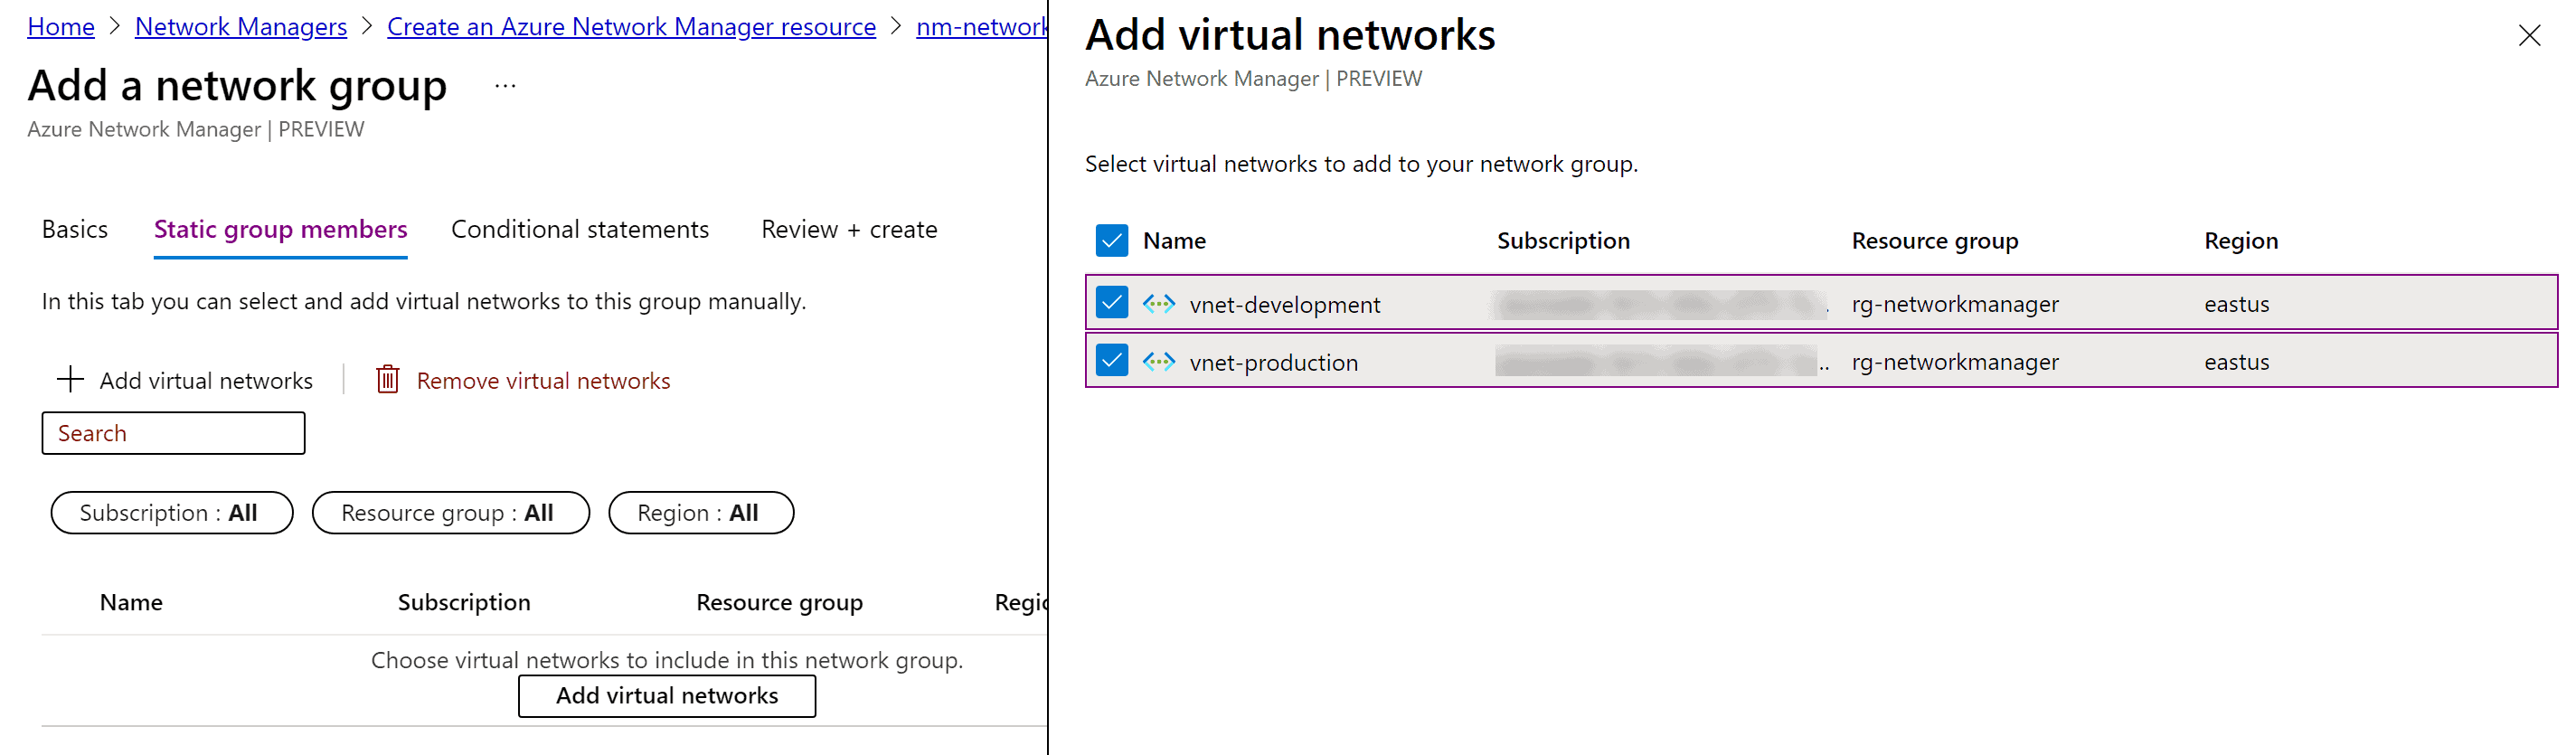 Adding vnets to a network group